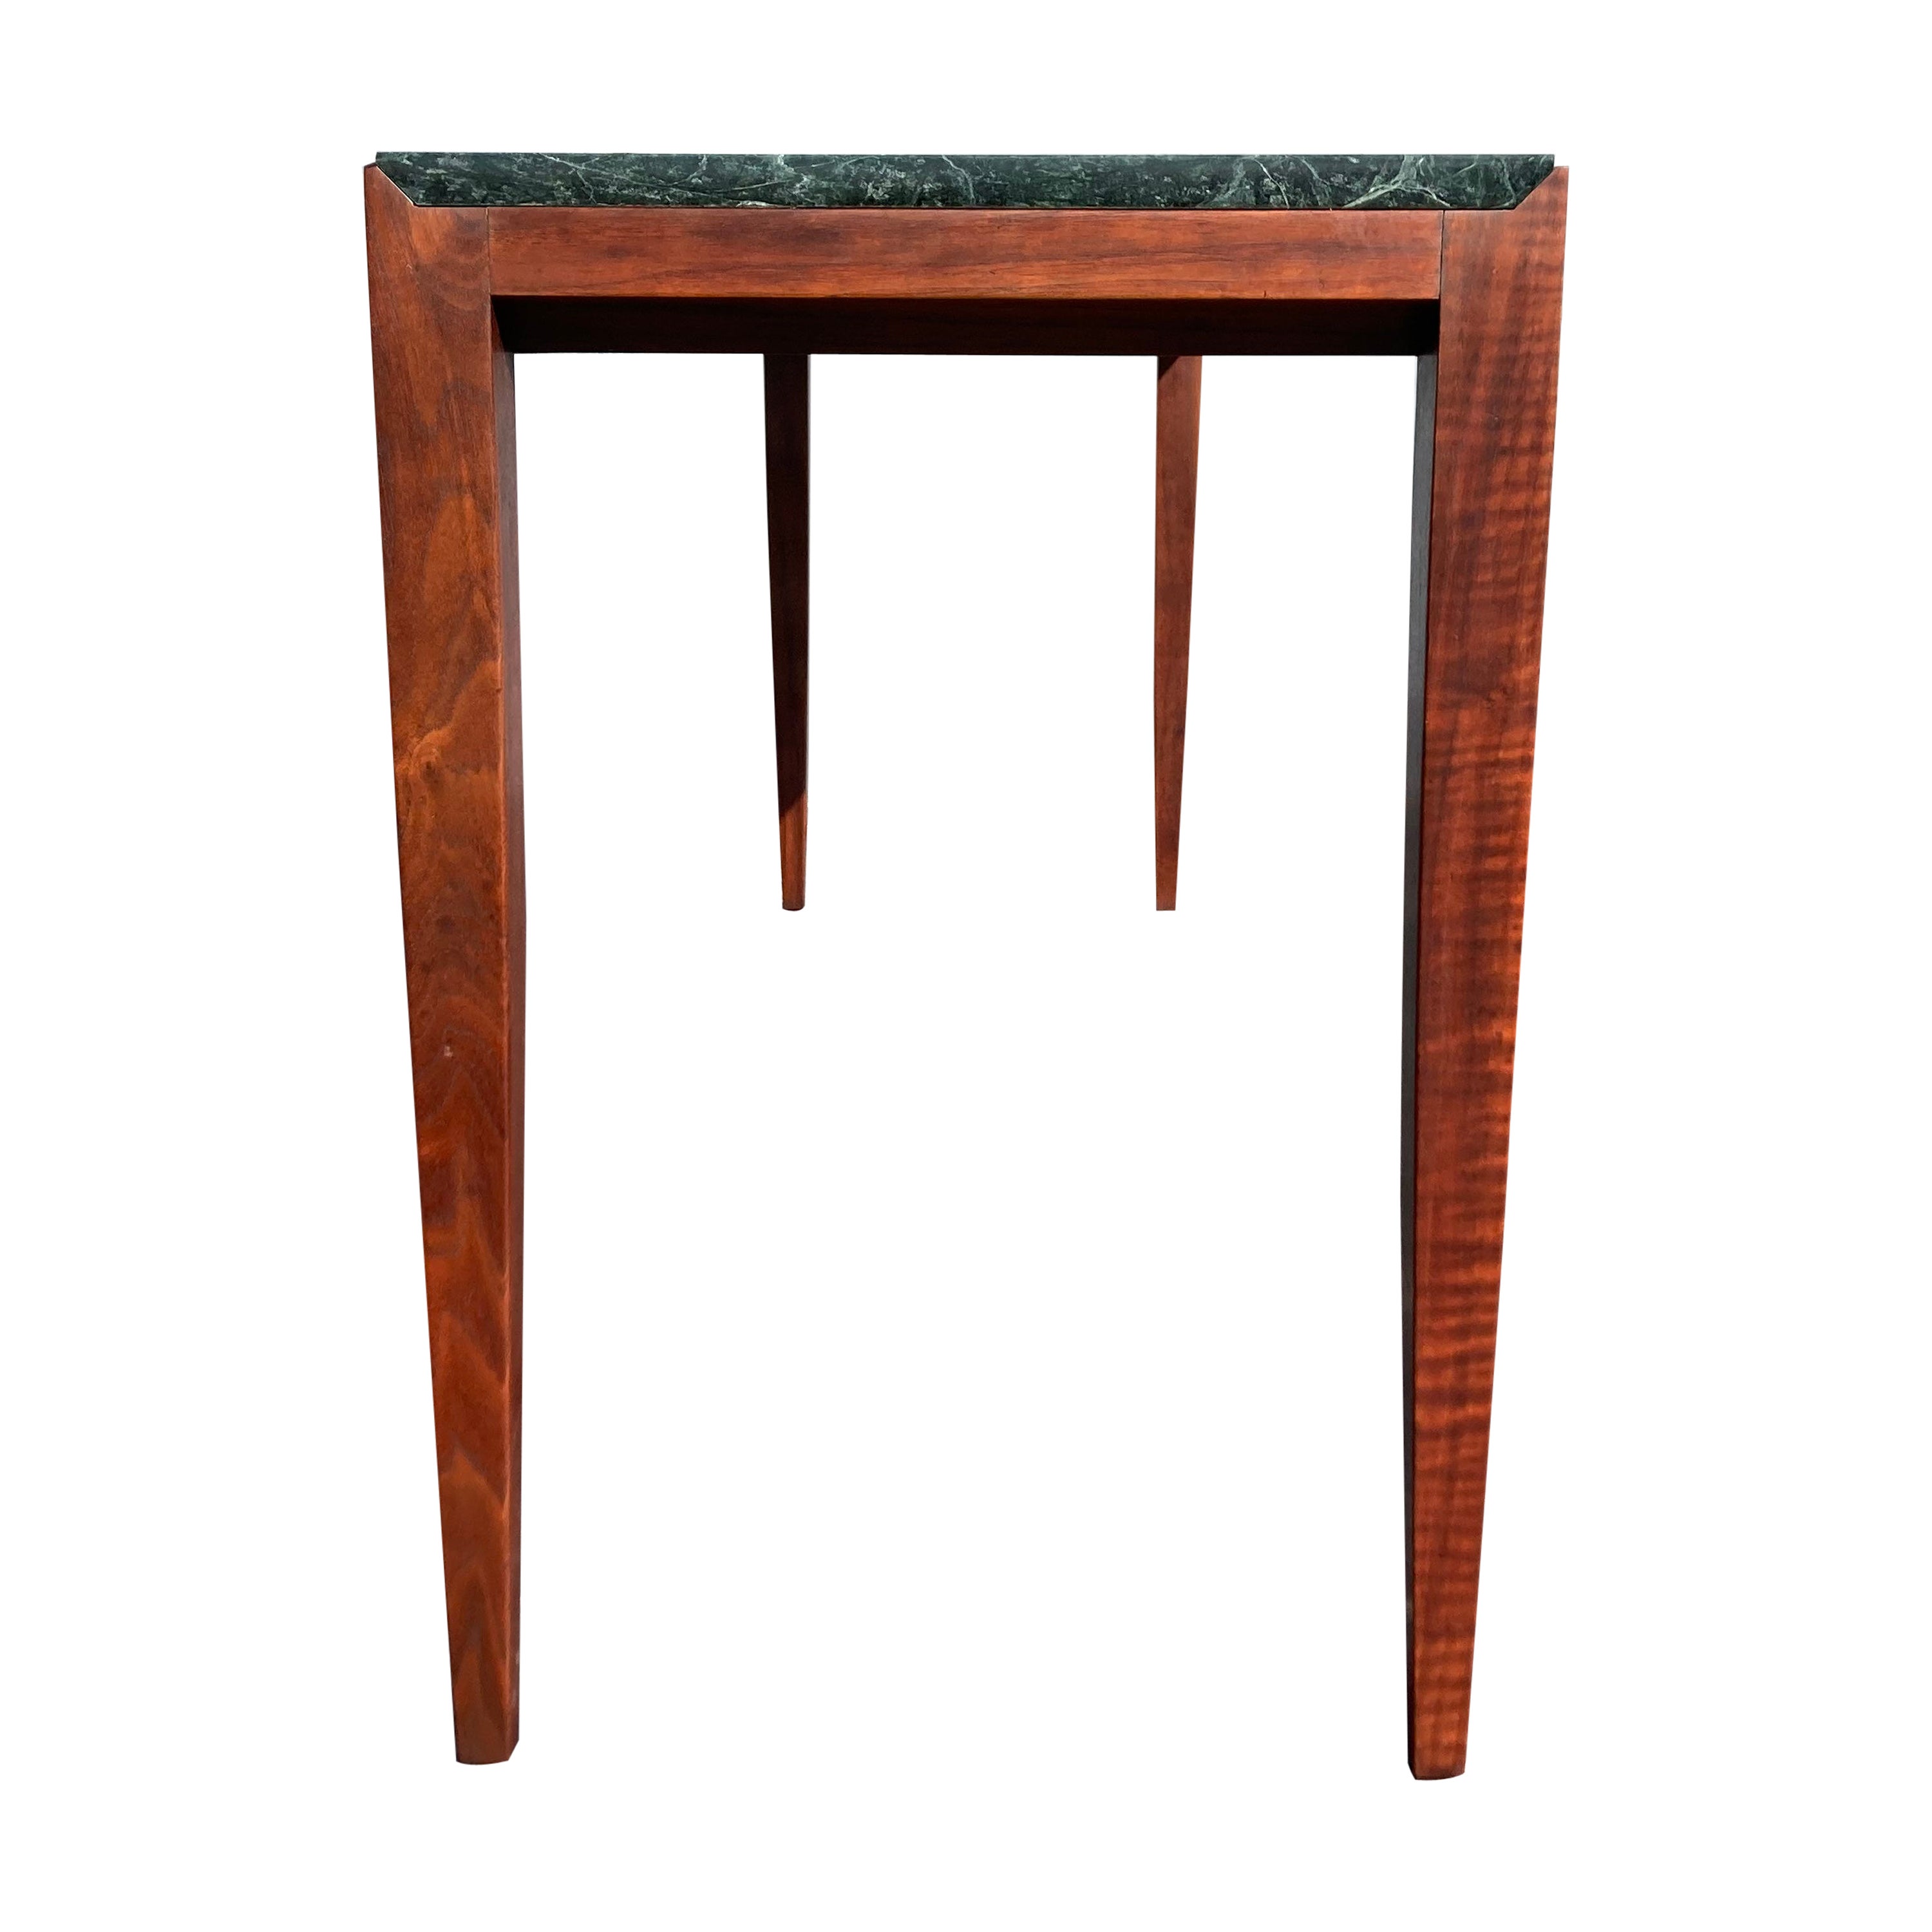 Beautiful Console Table Attributed to Gio Ponti, Walnut and Marble, 1950s